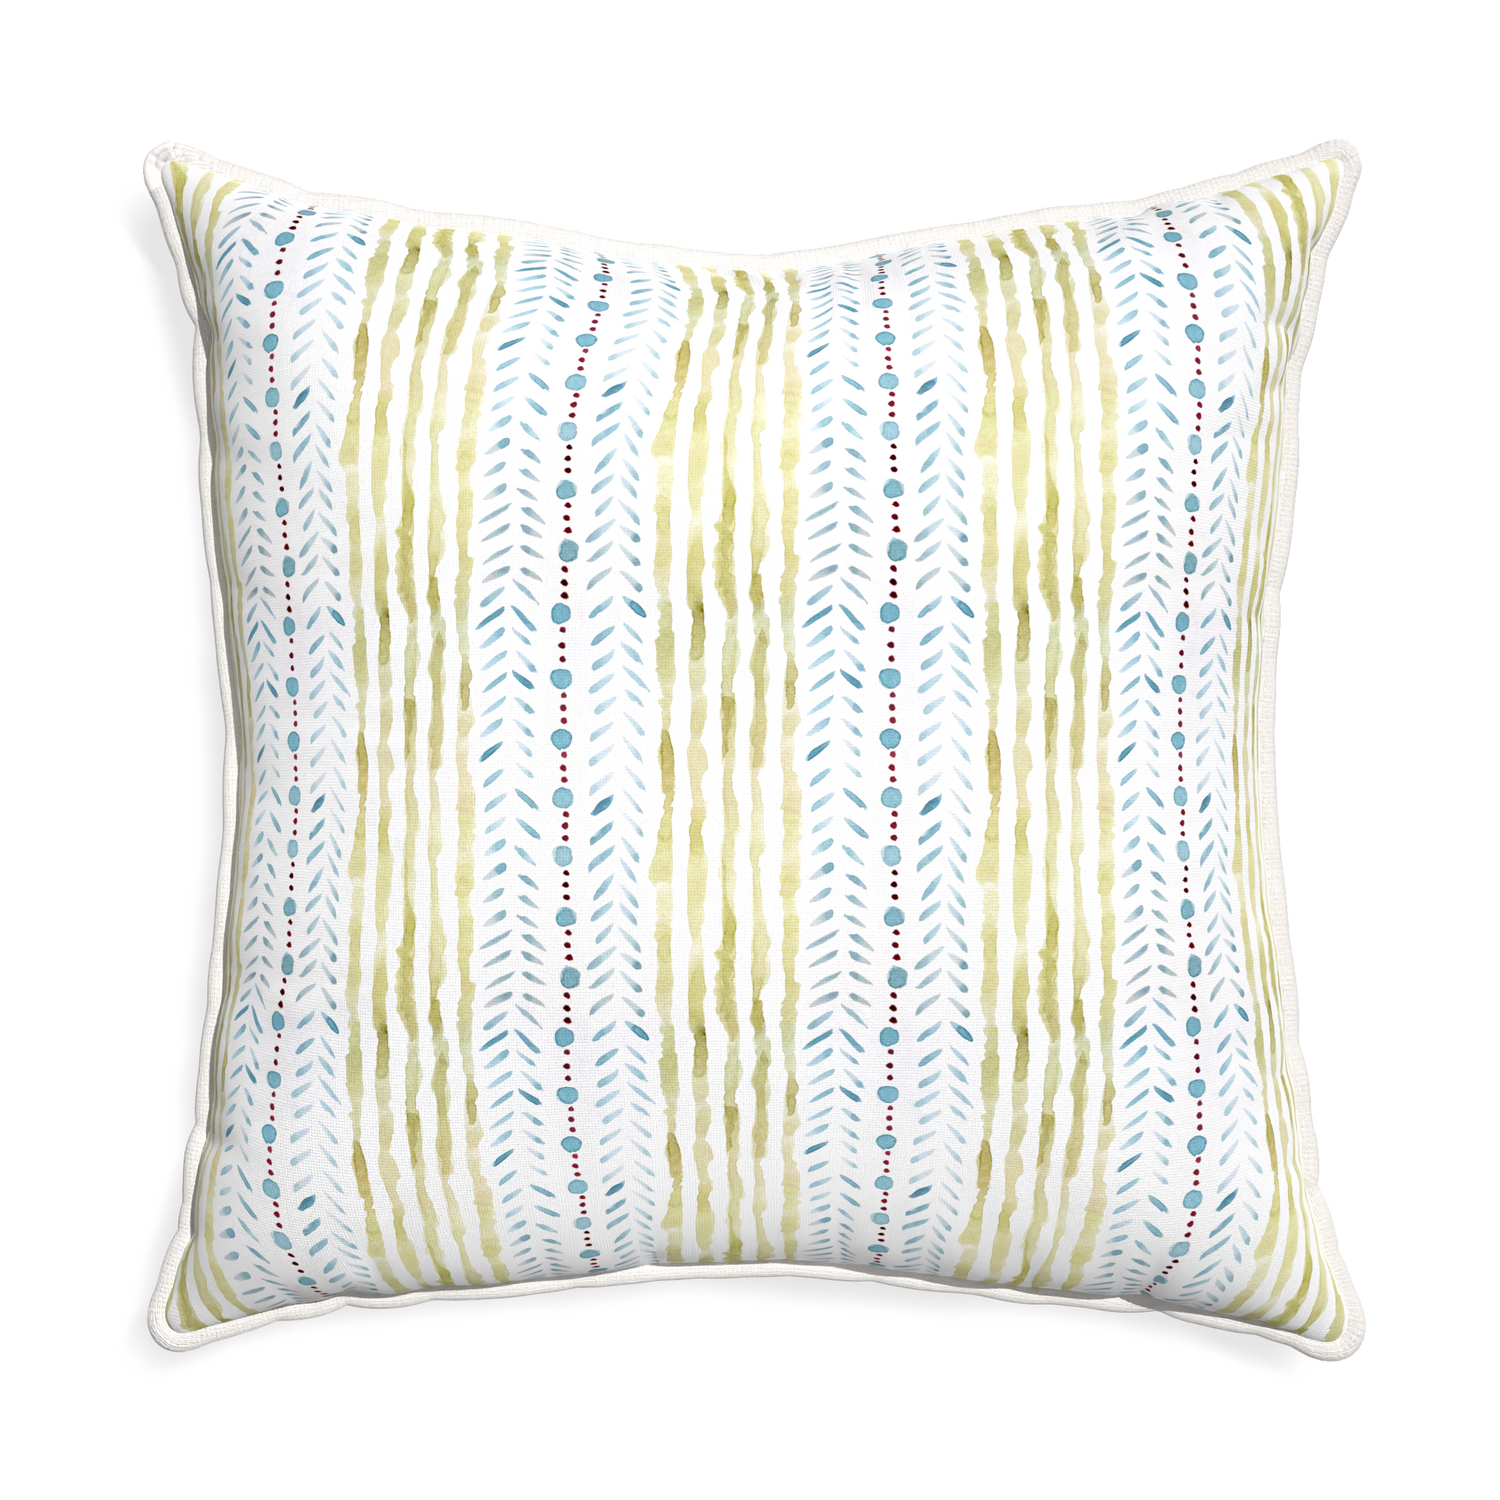 Euro-sham julia custom blue & green stripedpillow with snow piping on white background